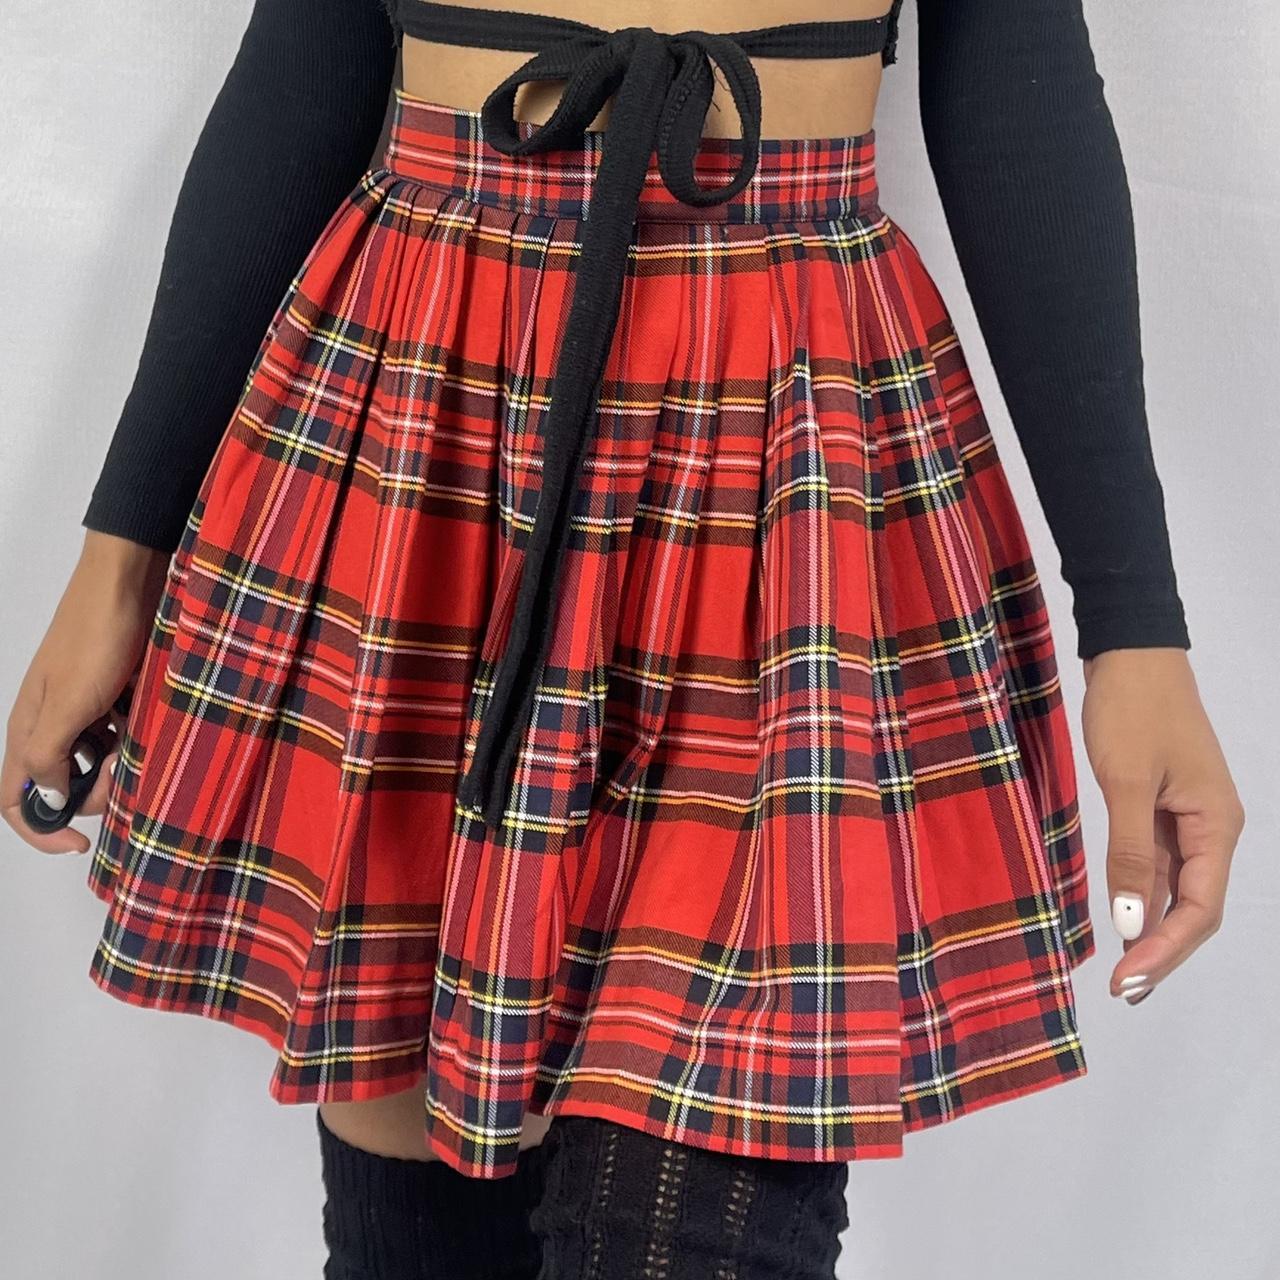 Product Image 2 - VINTAGE MINI SKIRT (XS-S)

ABOUT THE